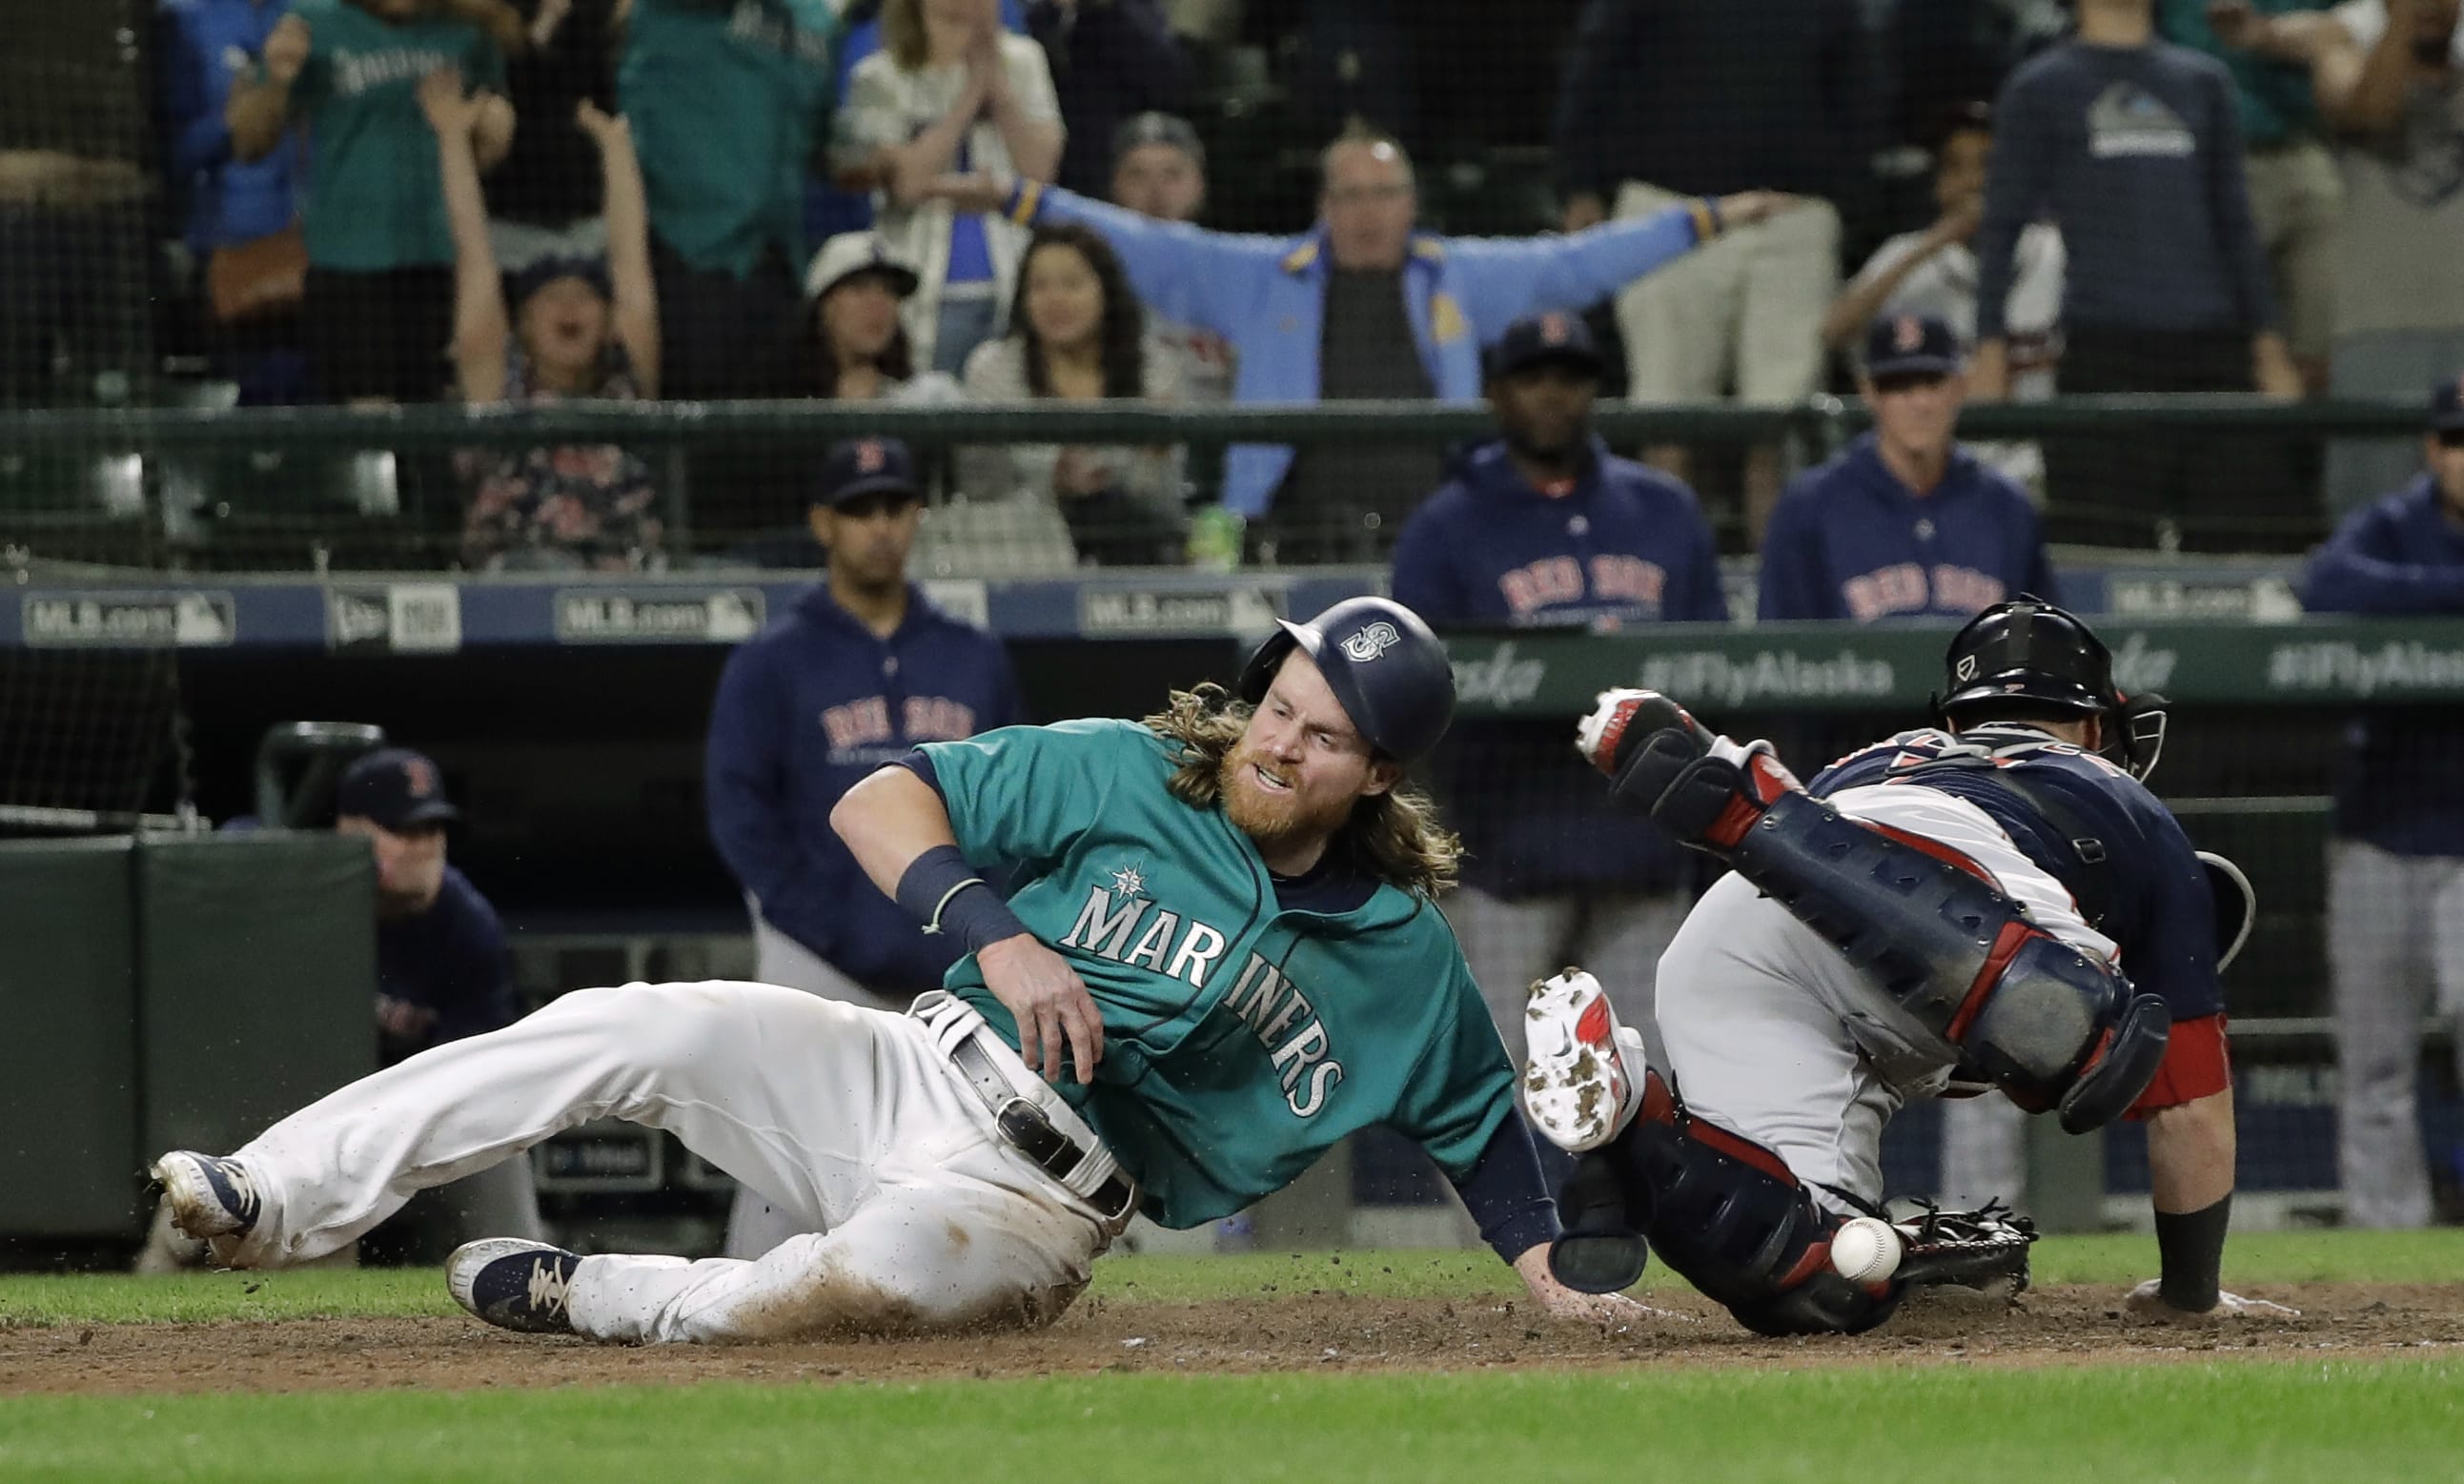 Seattle Mariners' Ben Gamel, left, scores as Boston Red Sox catcher Sandy Leon can't hold on to the ball during the eighth inning of a baseball game Friday, June 15, 2018, in Seattle. Gamel scored on a go-ahead two-run double by Denard Span. The Mariners won 7-6. (AP Photo/Ted S.